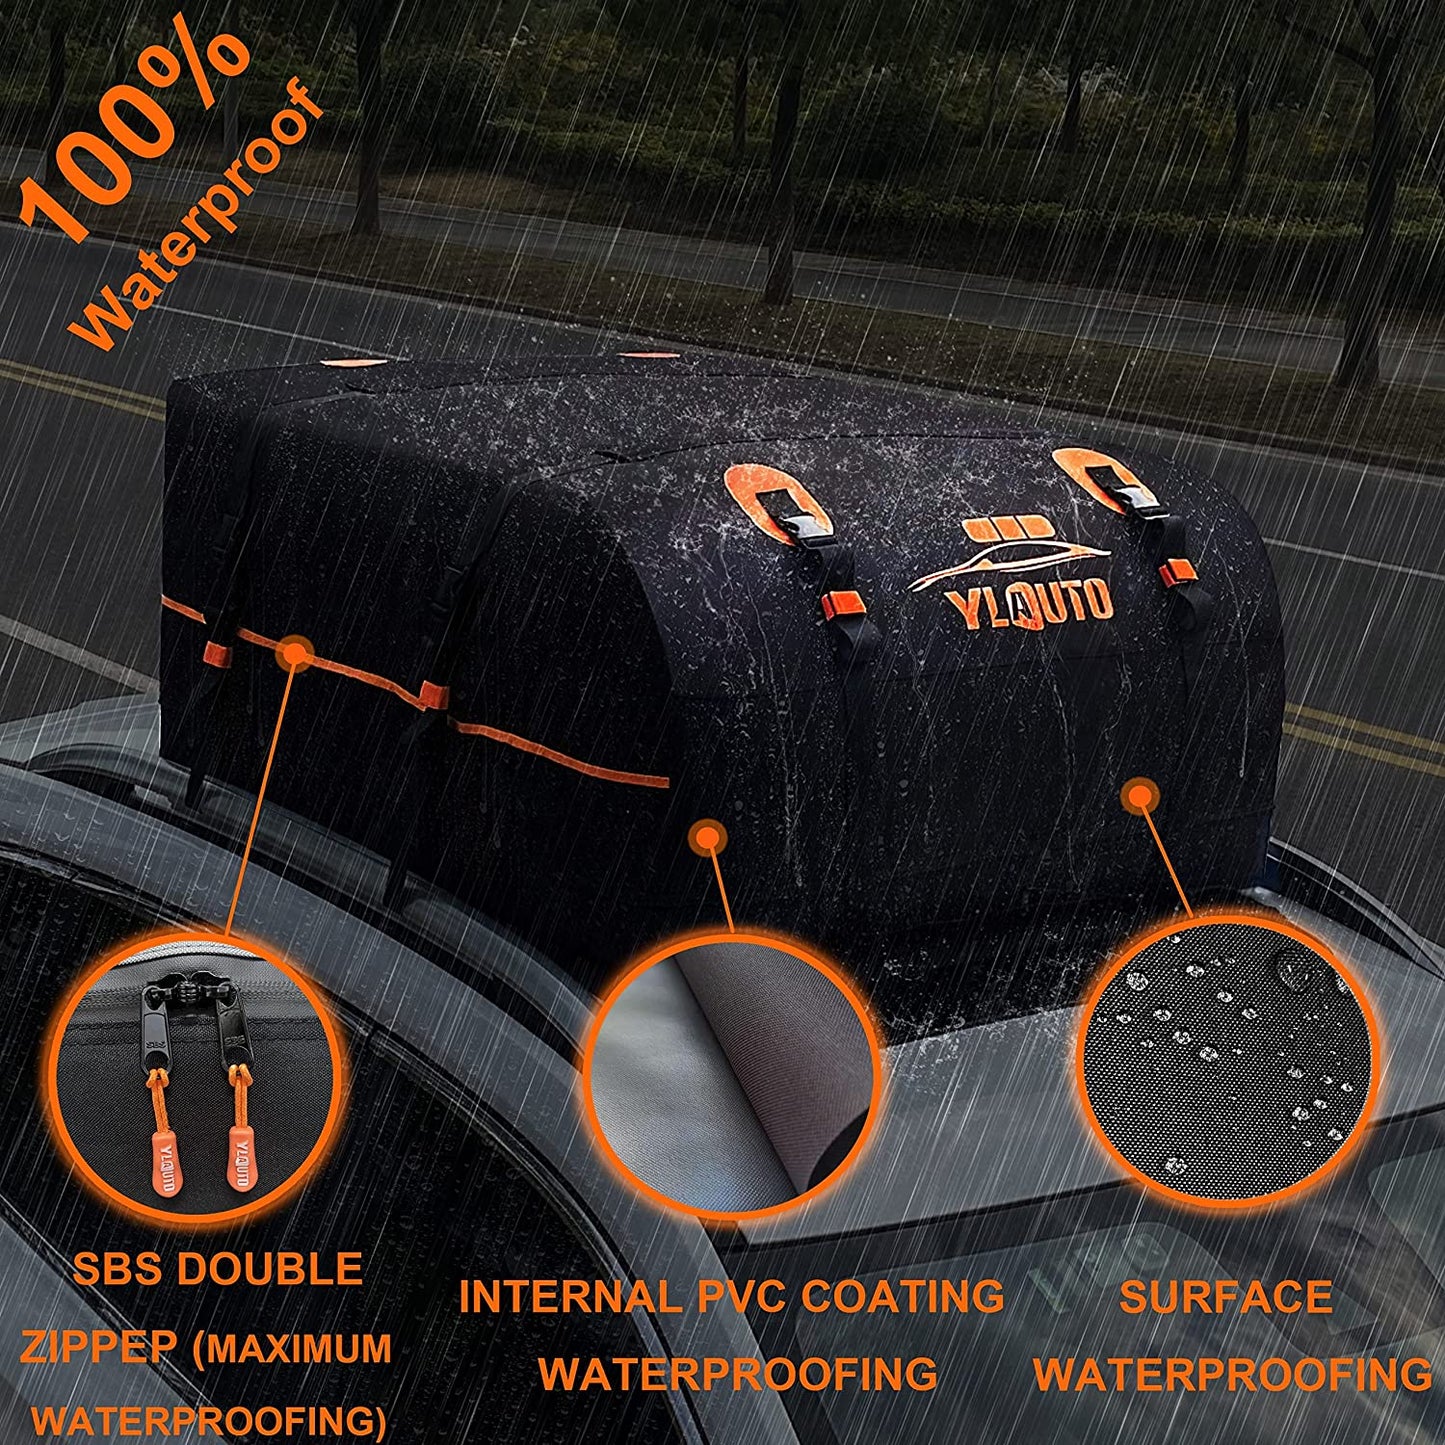 15 Expands to 20 Cubic Feet Aerodynamic Design Rooftop Cargo Bag,100% Waterproof Roof Luggage Bag, Rooftop Cargo Carrier with Anti-Slip Mat,Rooftop Car Bag Fits All Vehicle with/Without Rack